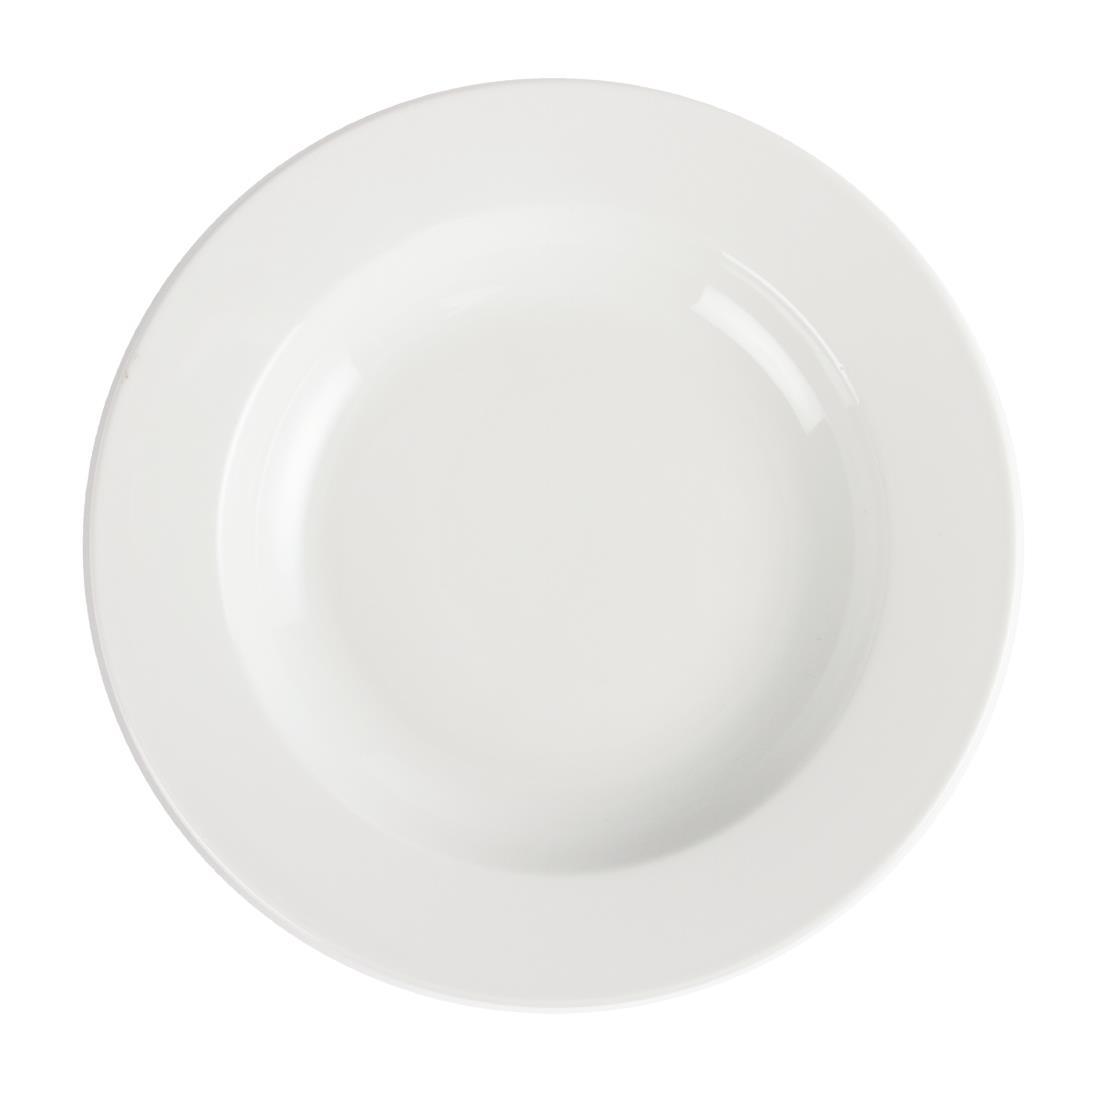 Olympia Whiteware Deep Plates 270mm 430ml (Pack of 6) - C363  - 4